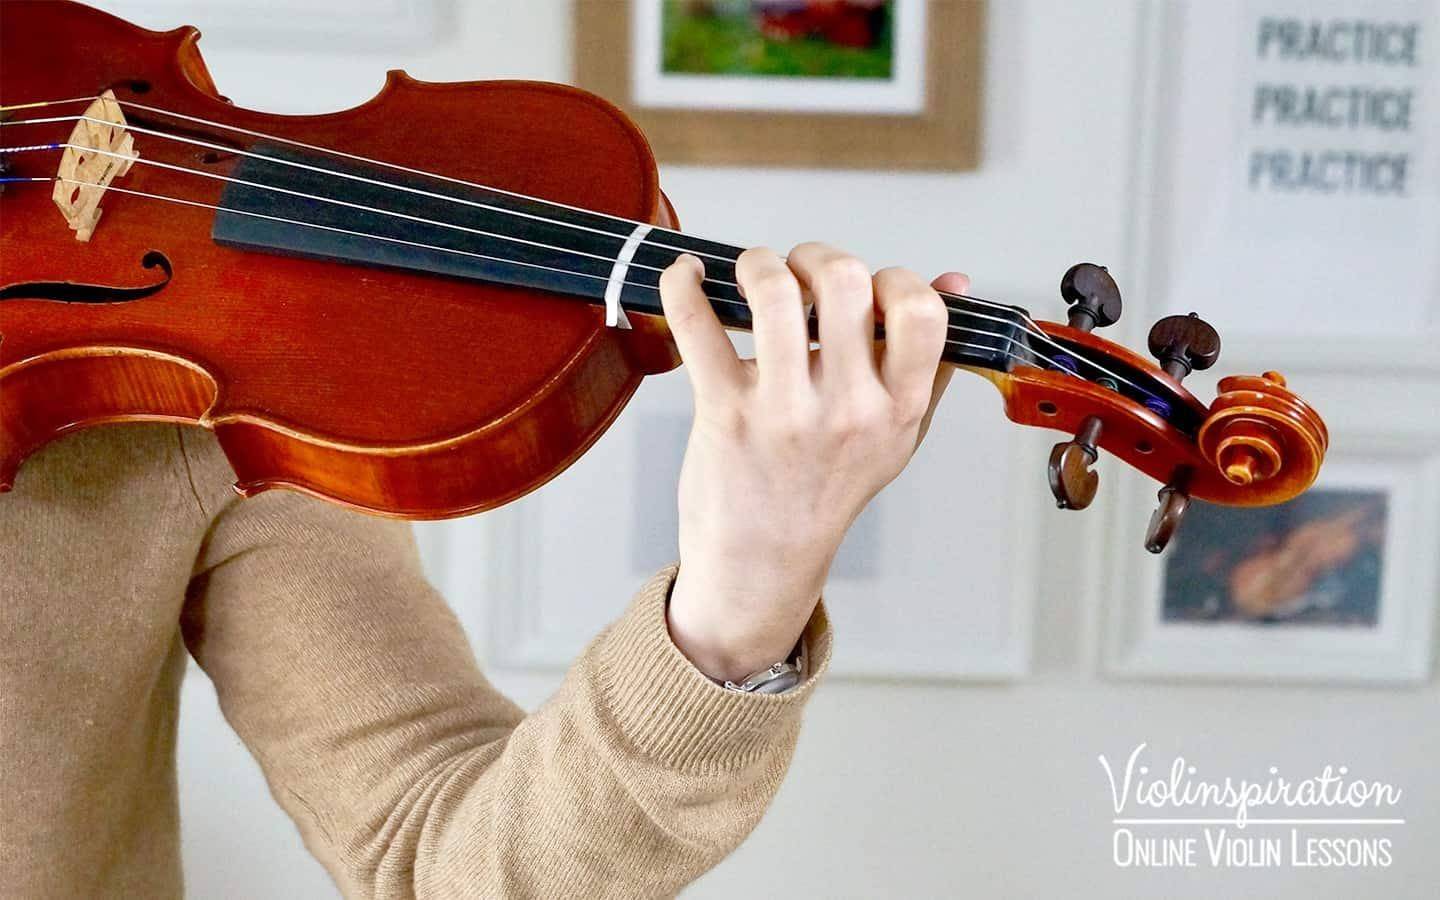 finger placement on violin - wrist position